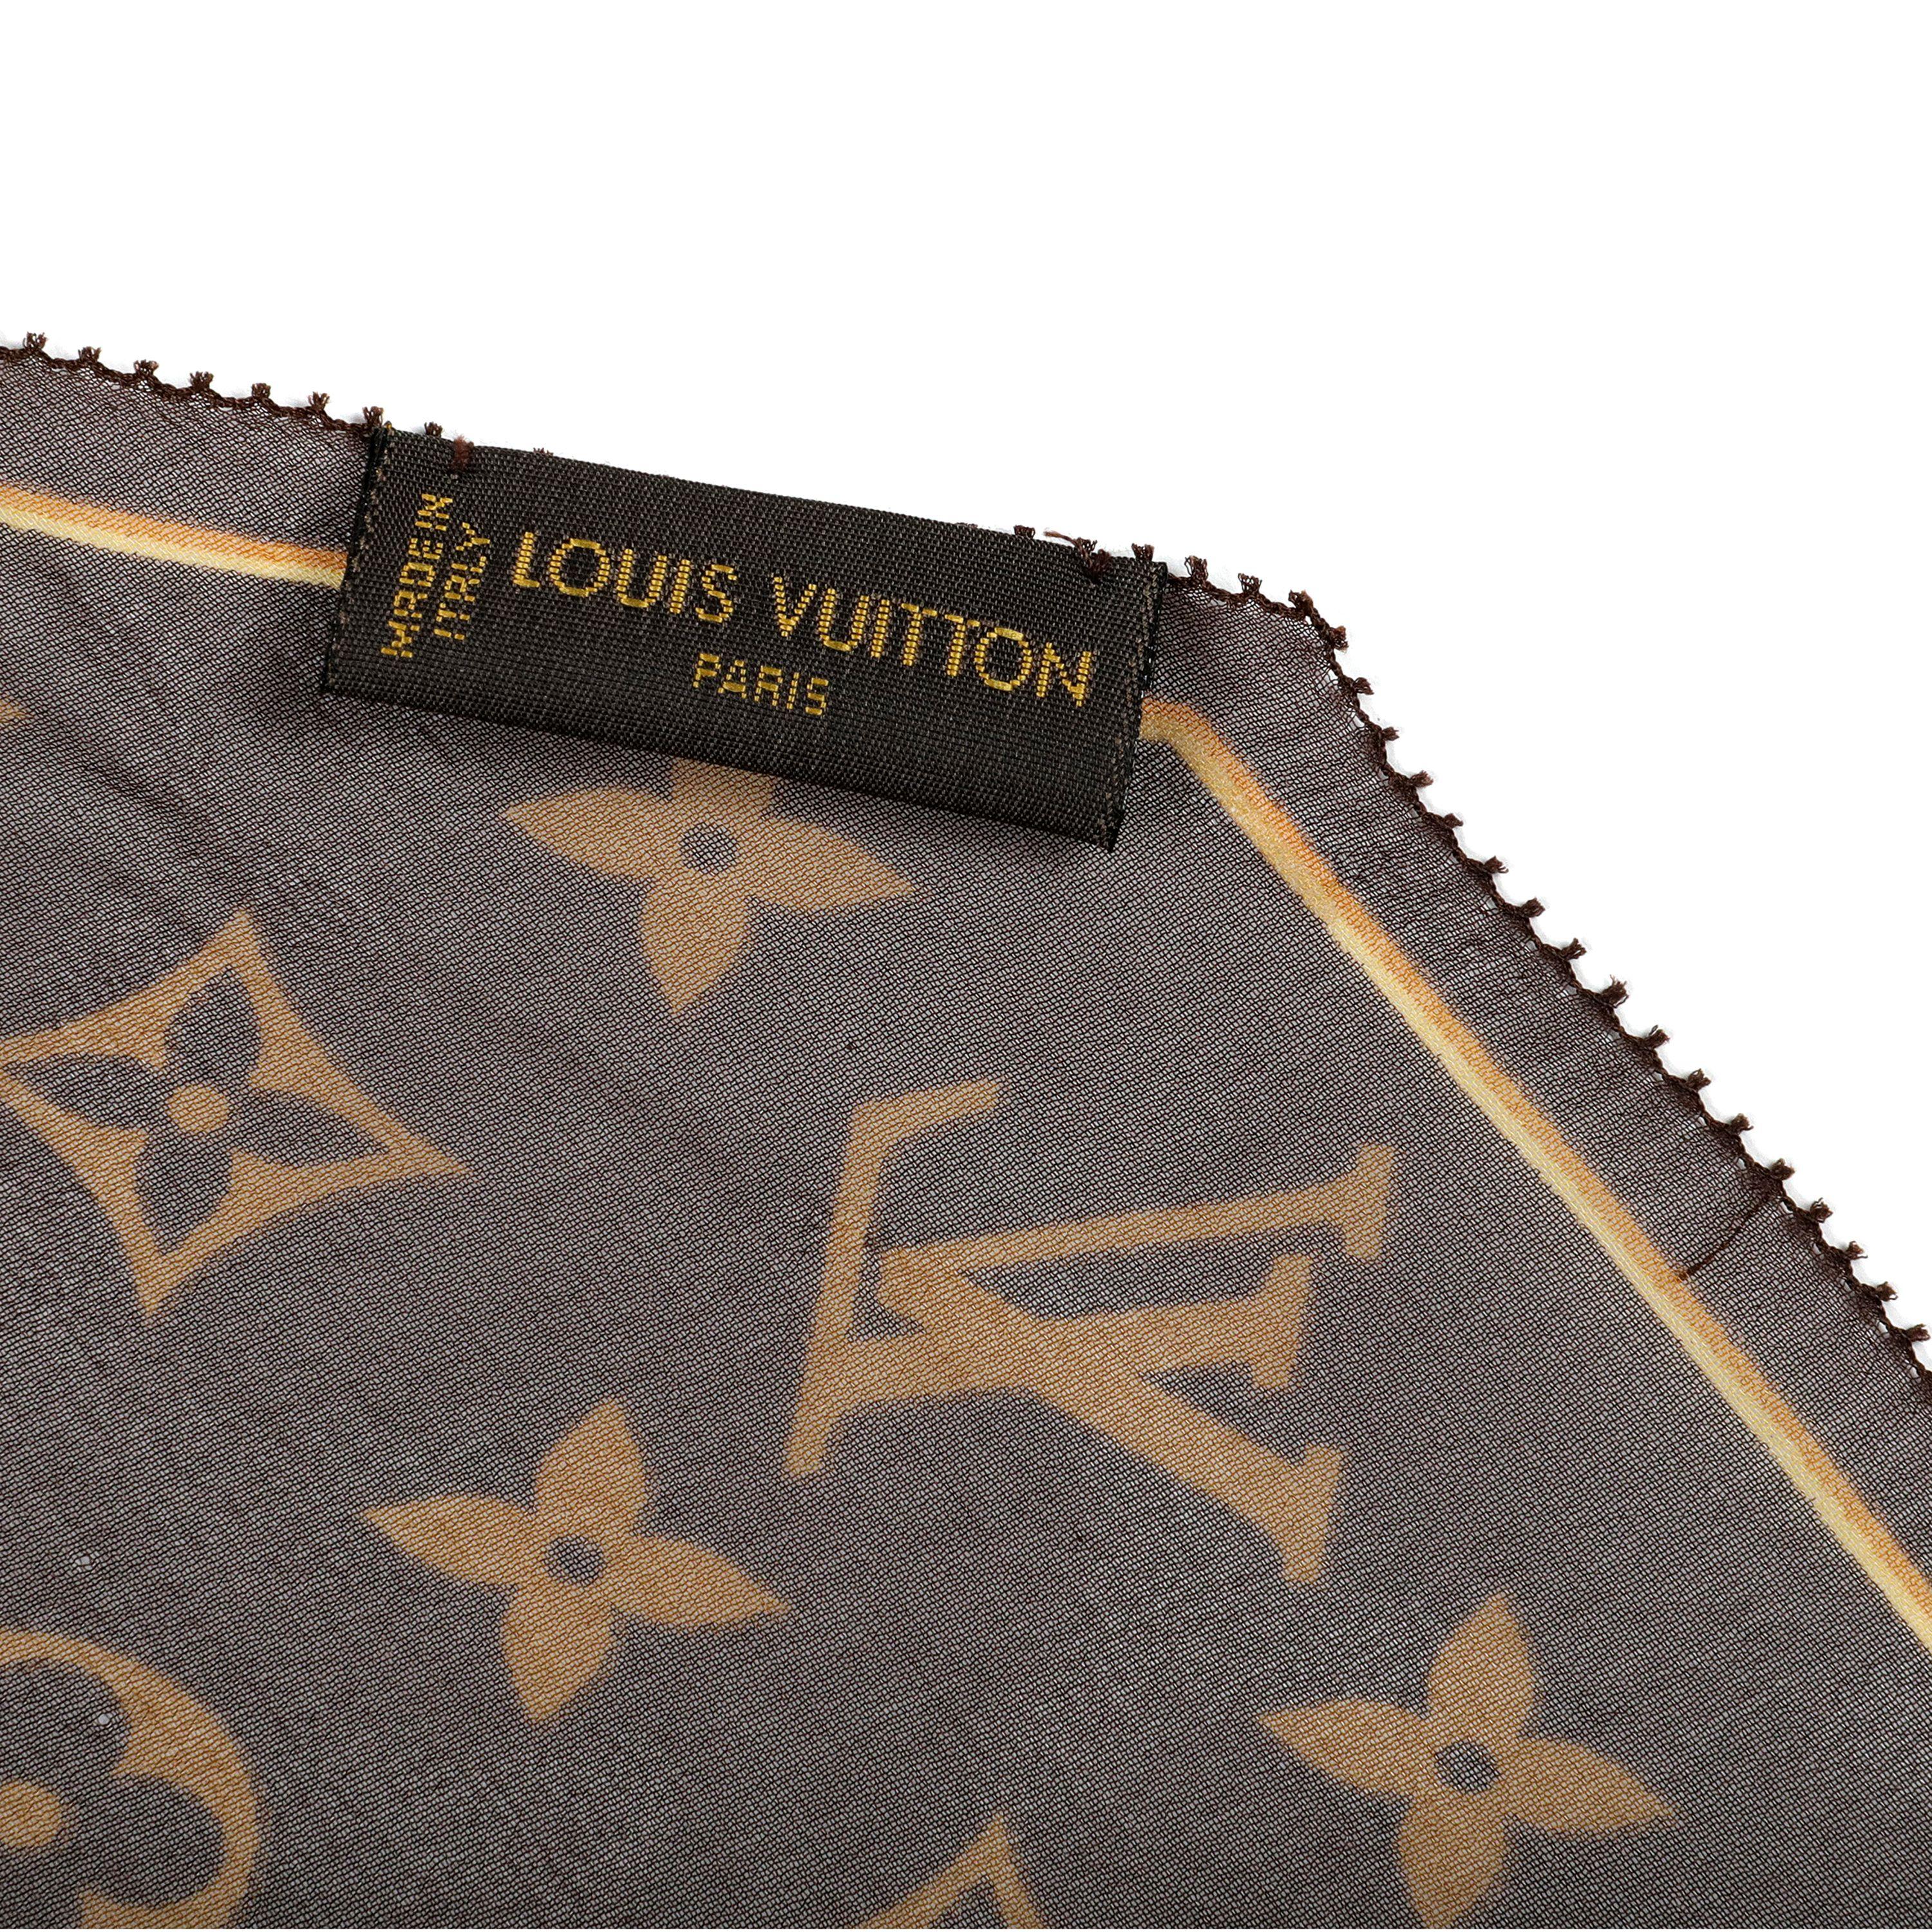 Louis Vuitton Chiffon Cheetah Skinny Scarf In Excellent Condition For Sale In Palm Beach, FL